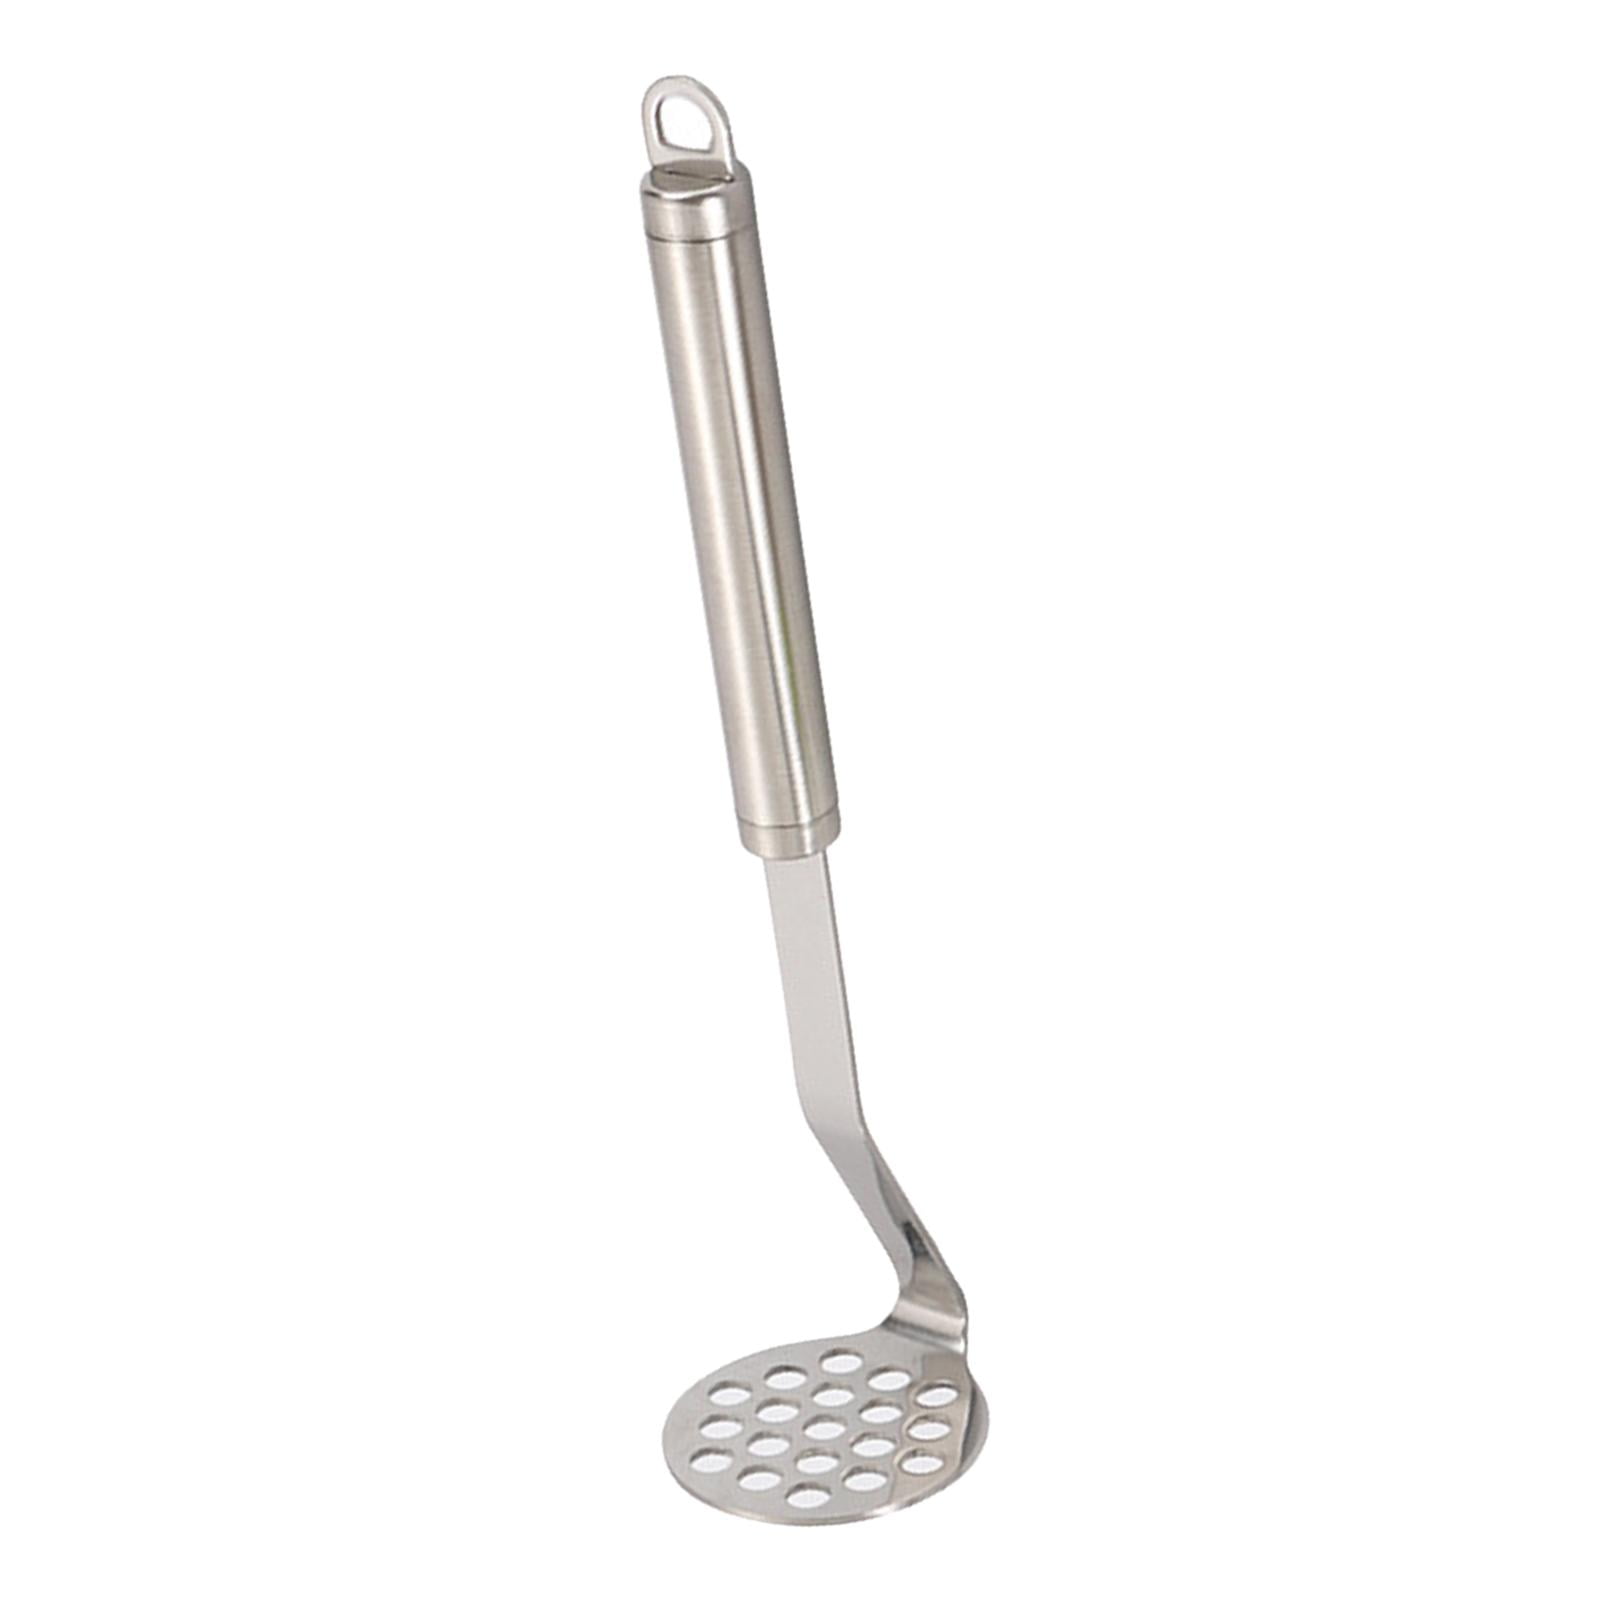 1pc 430 Large Stainless Steel Potato Masher, Extra Strength Bean And Potato  Masher, Household Manual Food Masher Tool